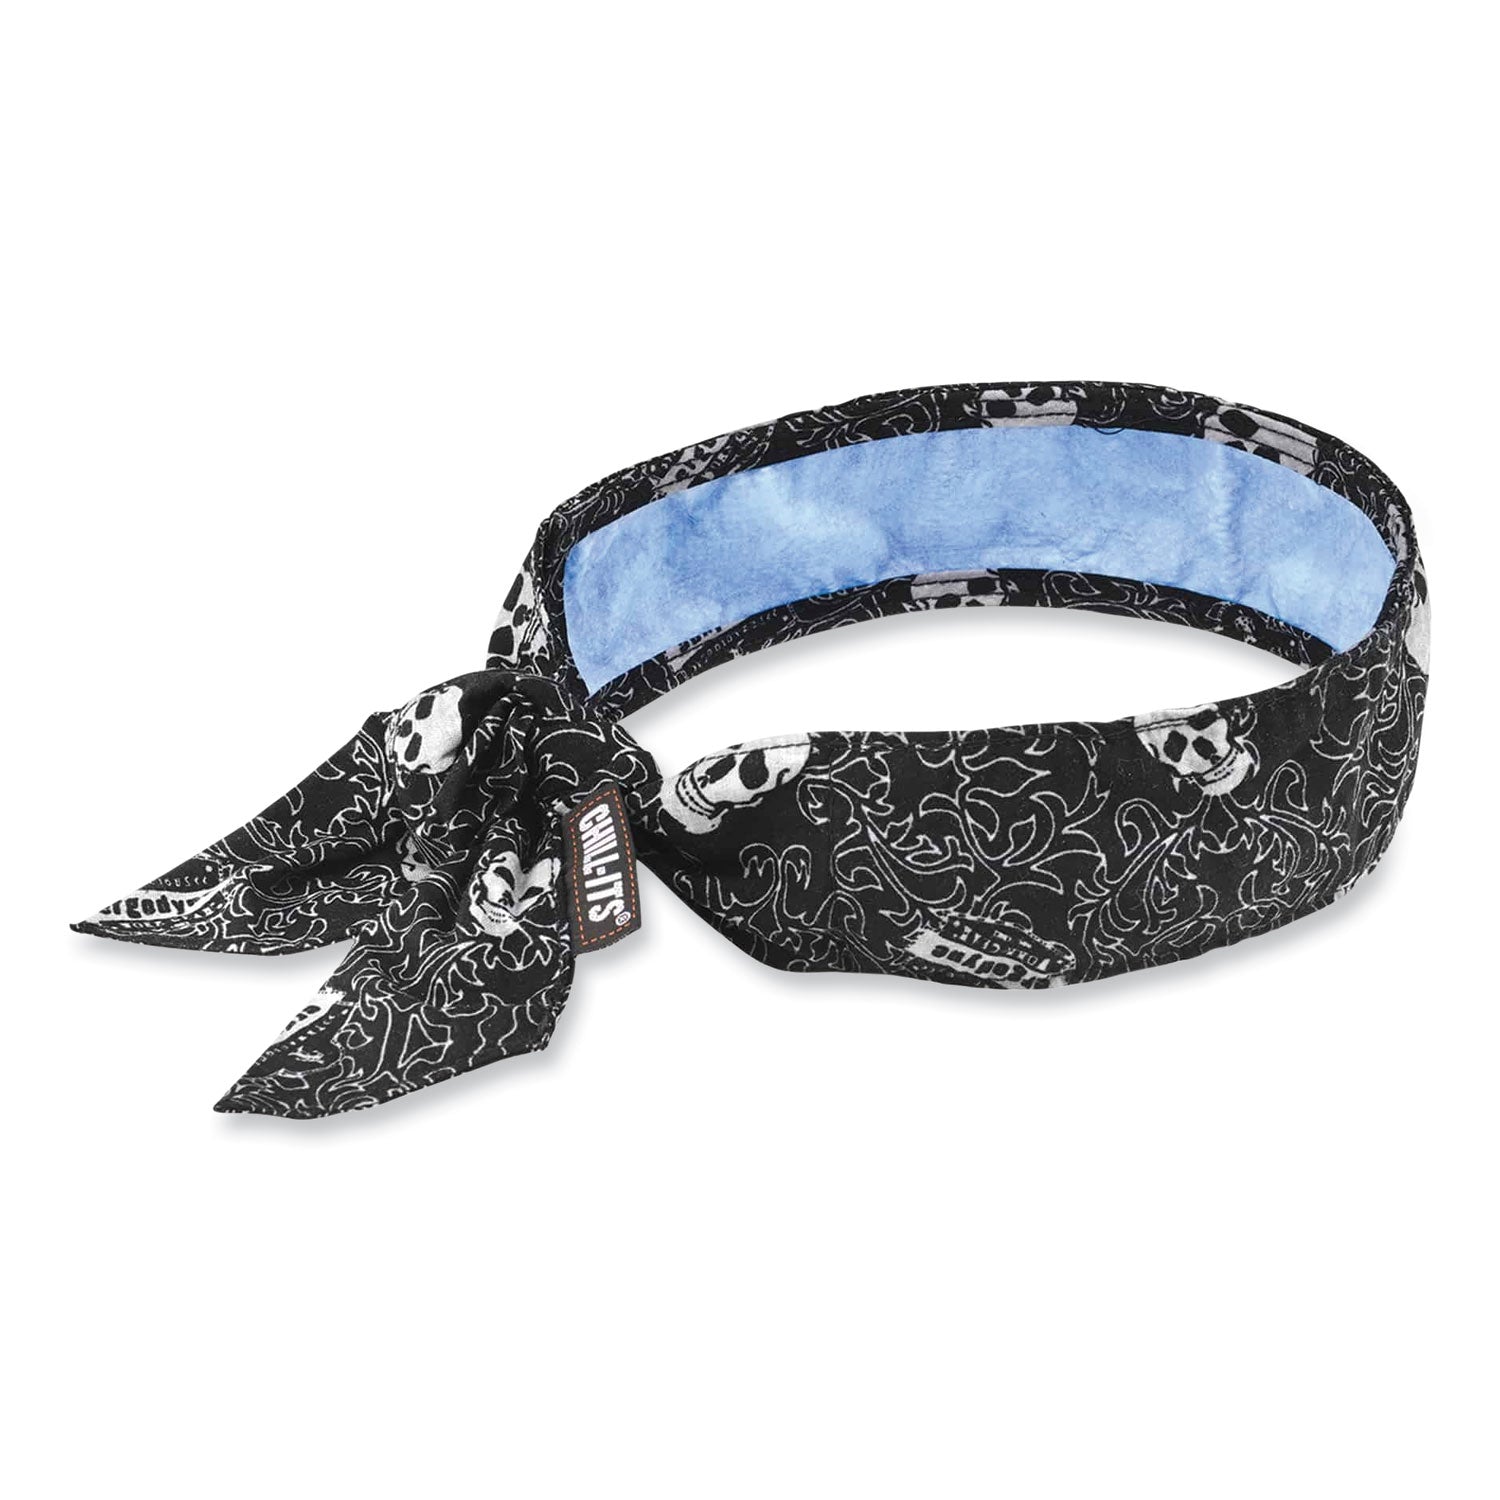 chill-its-6700ct-cooling-bandana-pva-tie-headband-one-size-fits-most-skulls-ships-in-1-3-business-days_ego12569 - 1